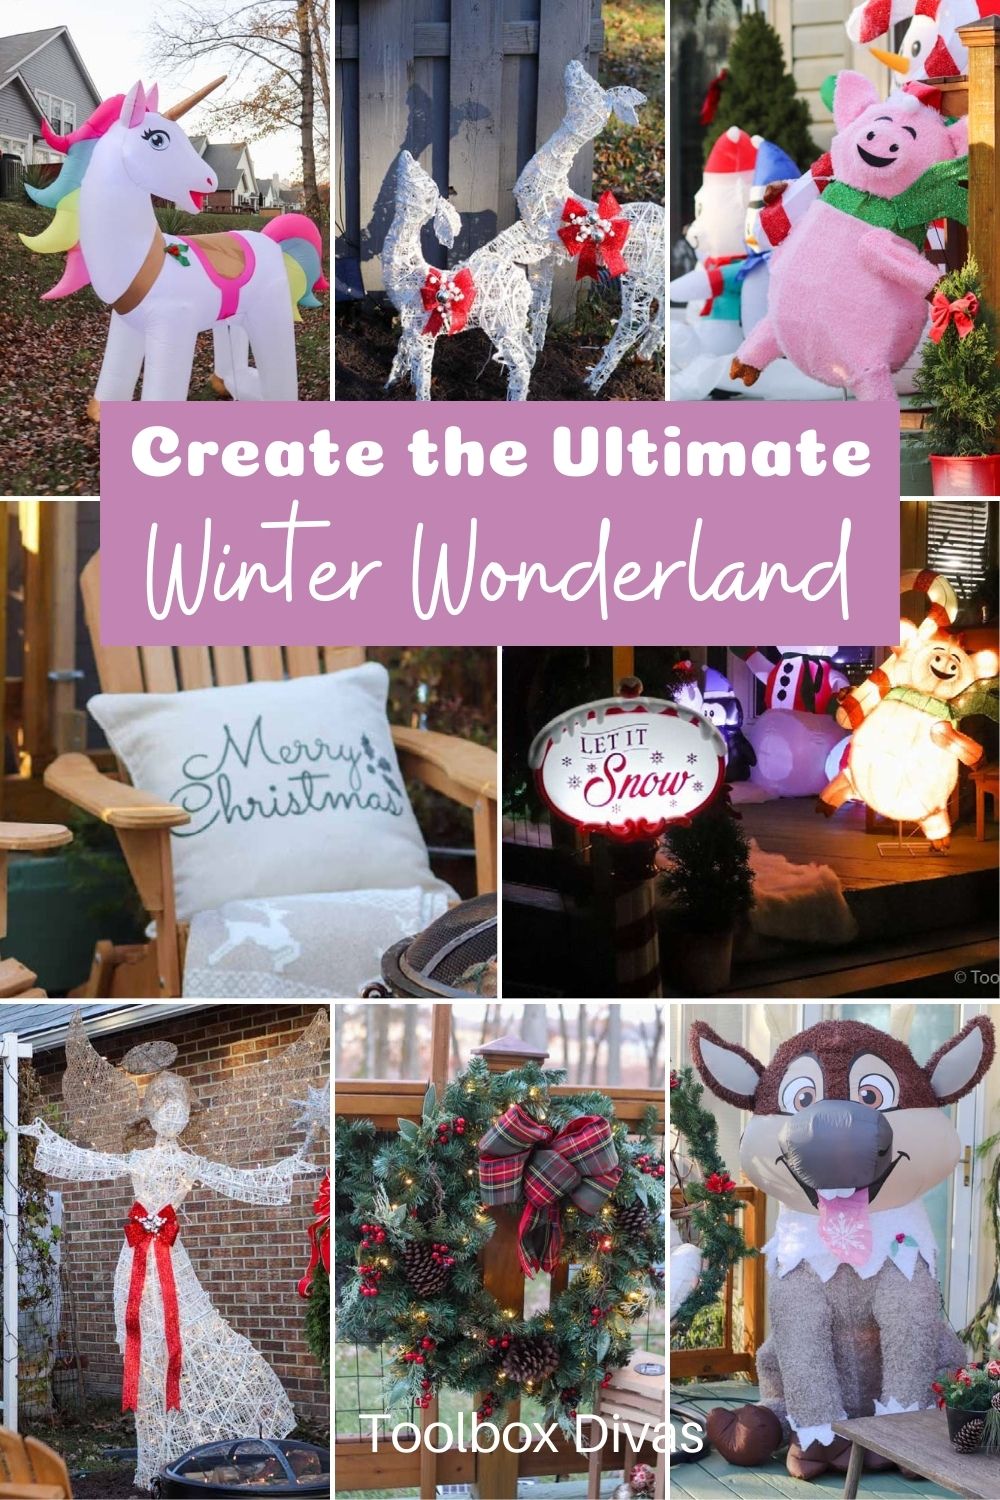 image collage of outdoor holiday decor with text overlay "Create the Ultimate Winter Wonderland"